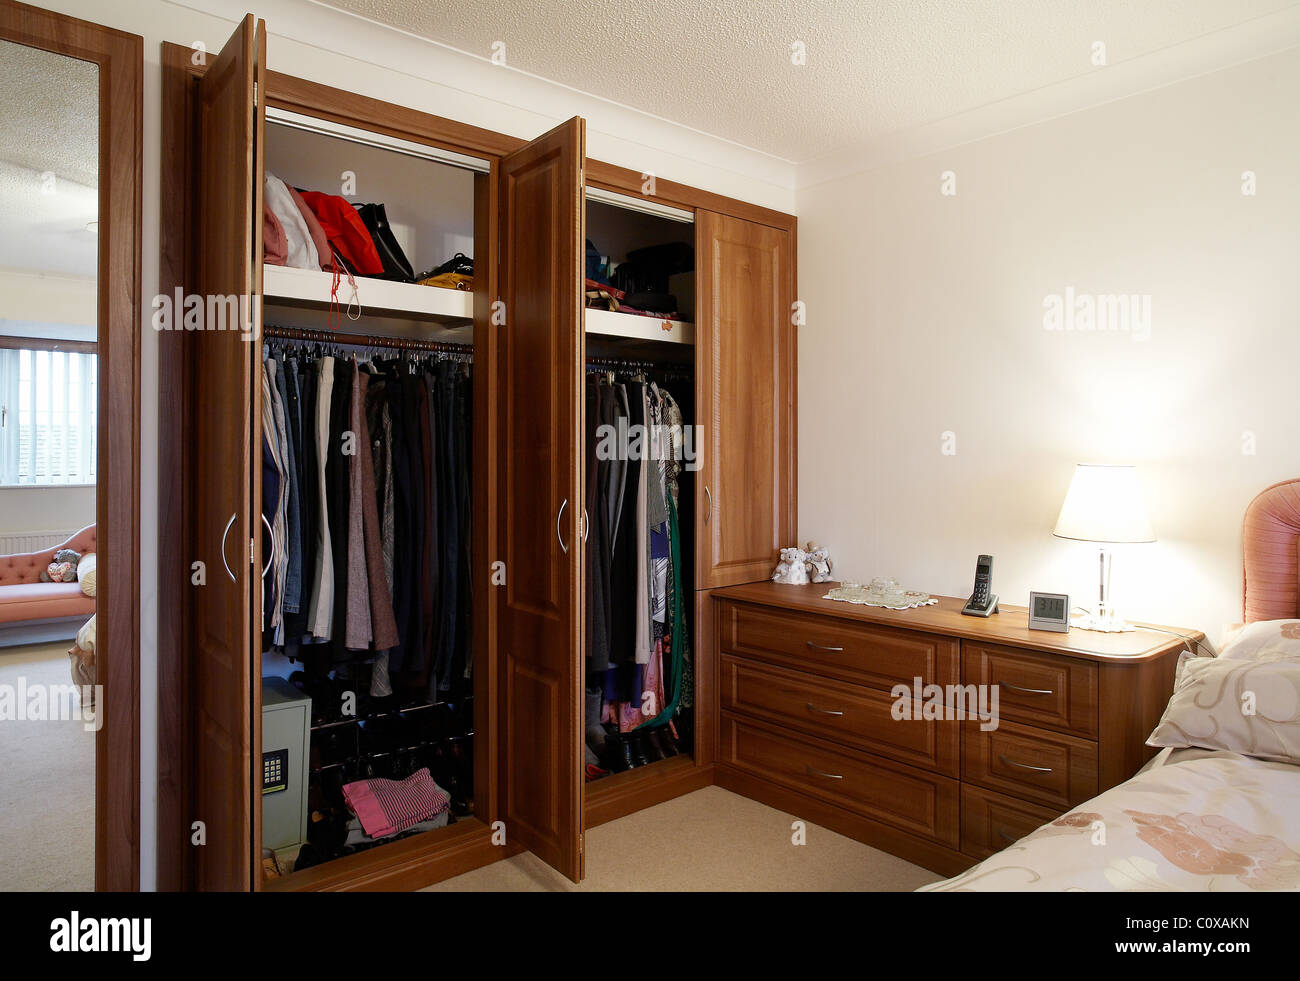 A bedroom with wooden oak wardrobe with doors open in the Uk. Stock Photo